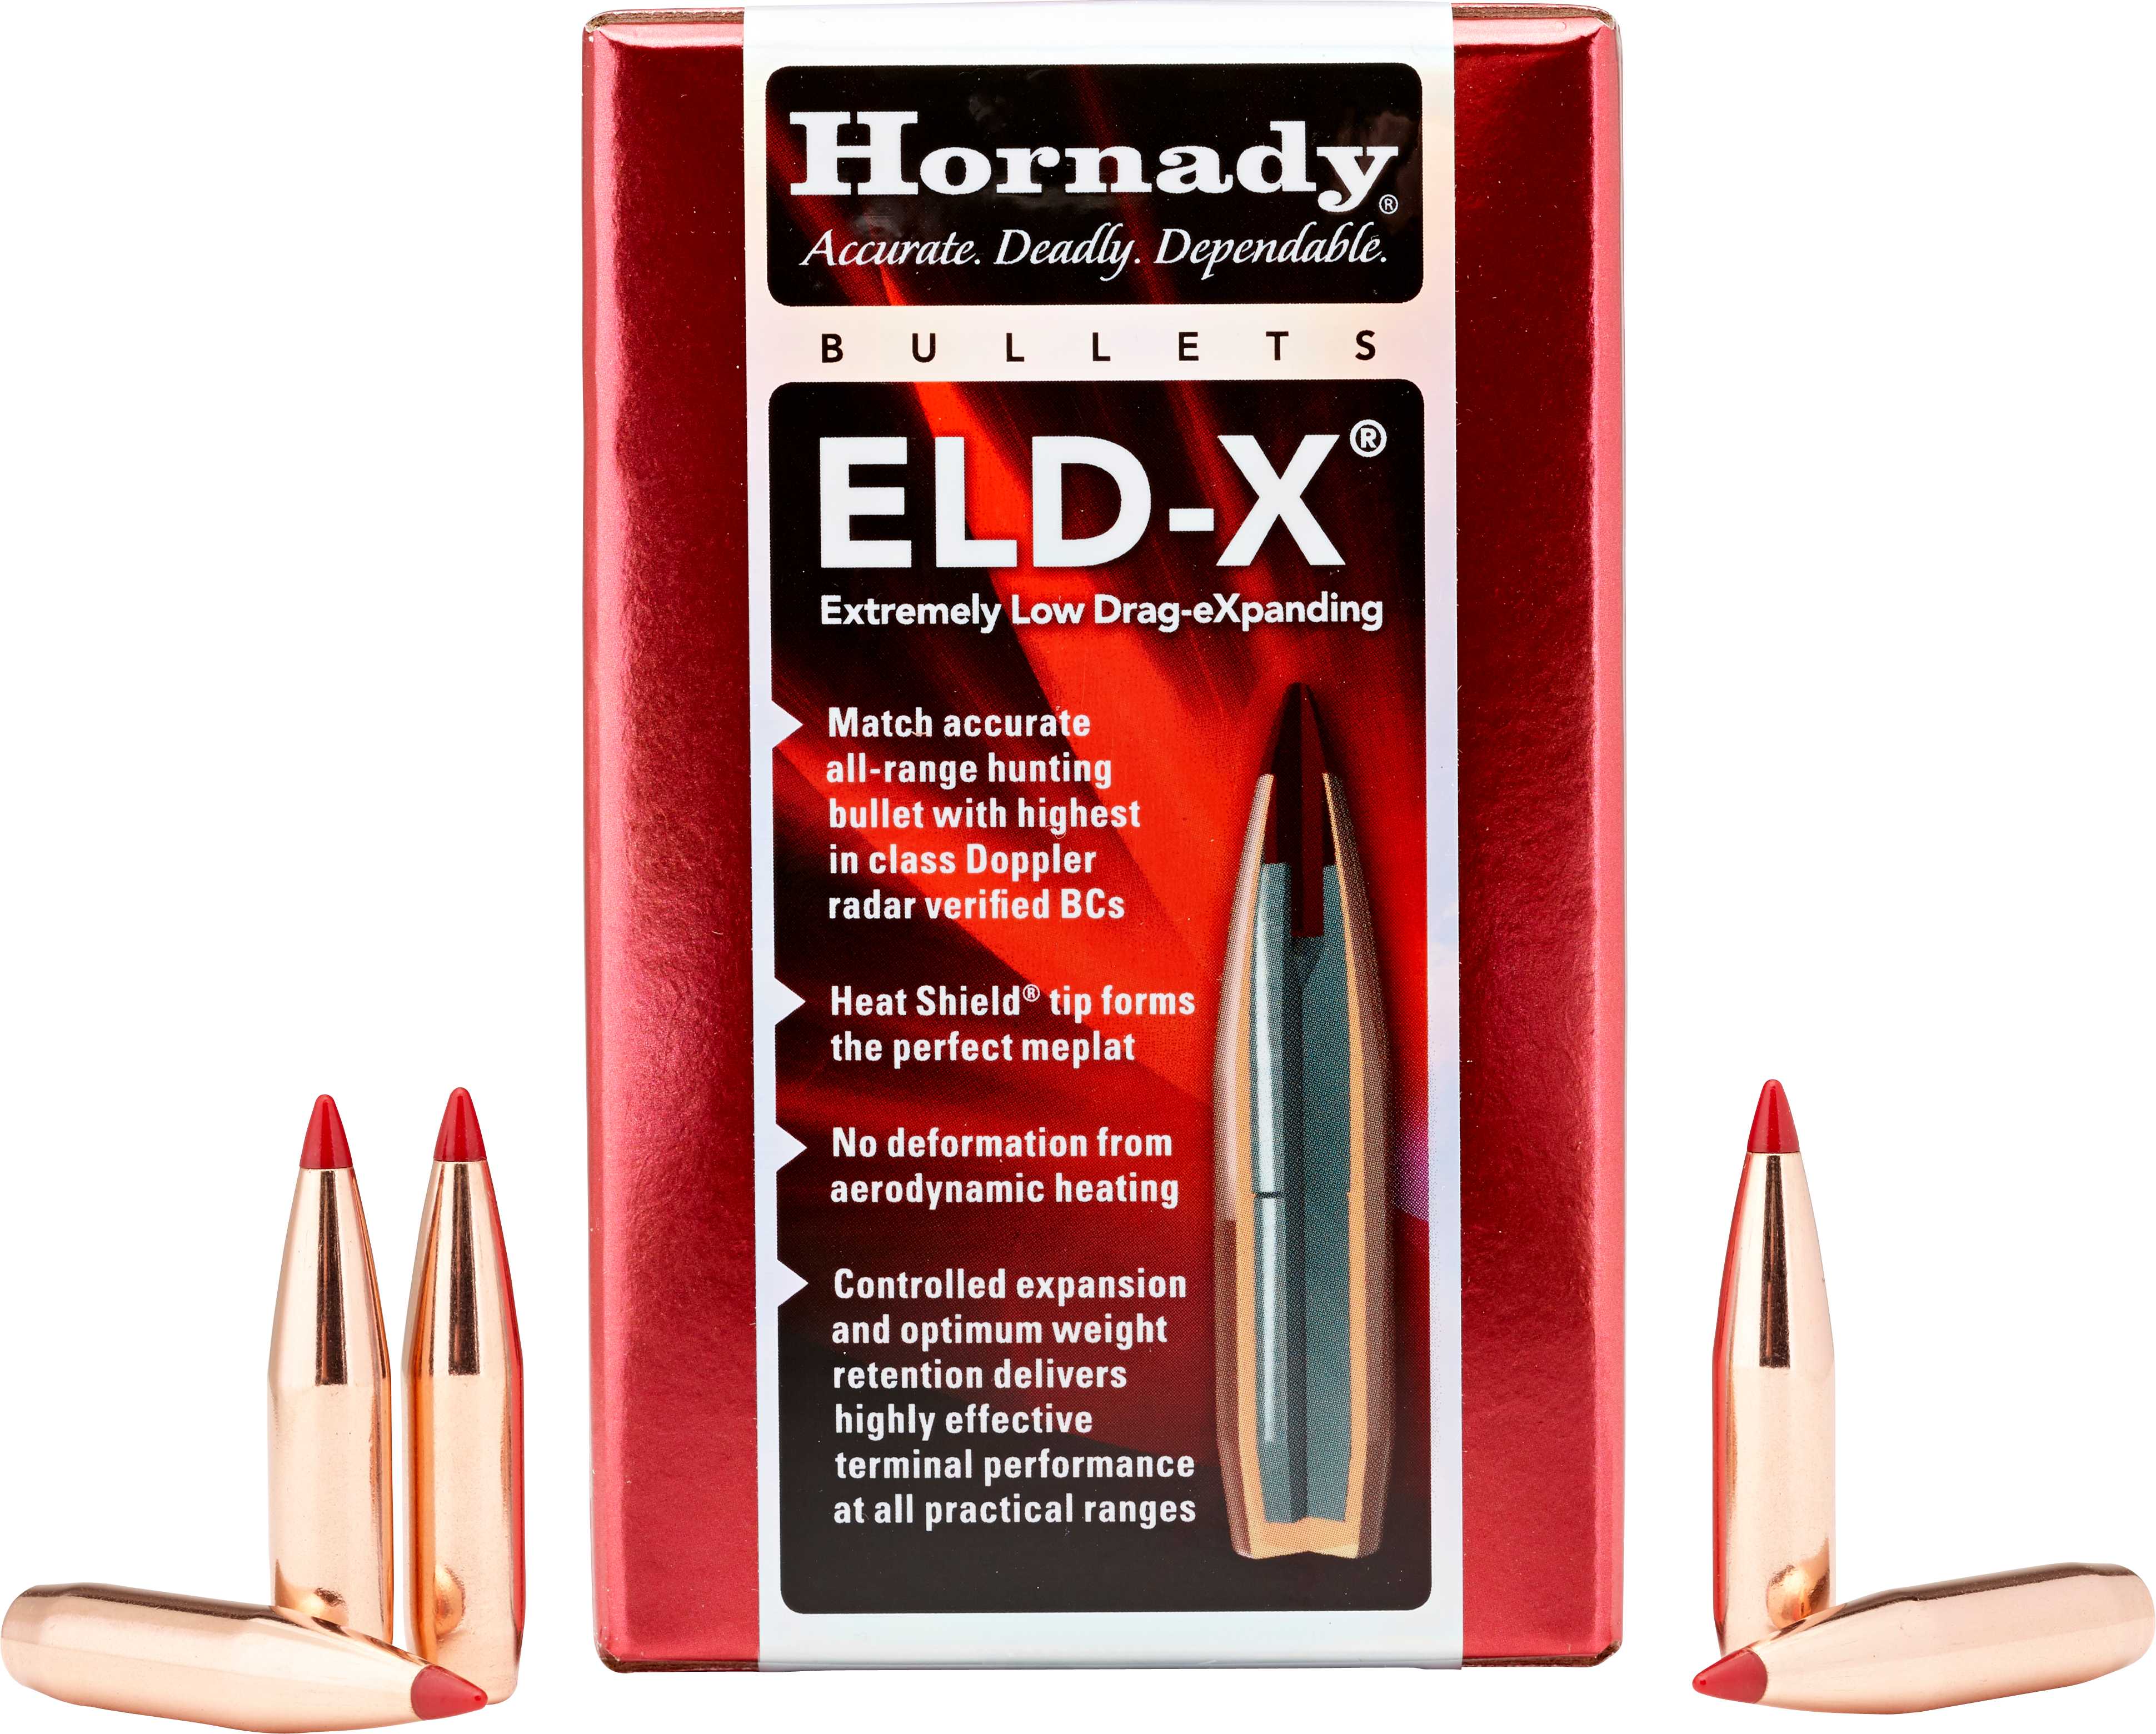 Hornady 30 Caliber 220 Grain Boat Tail ELD-X Reloading Bullets 100 Count Md: 3078